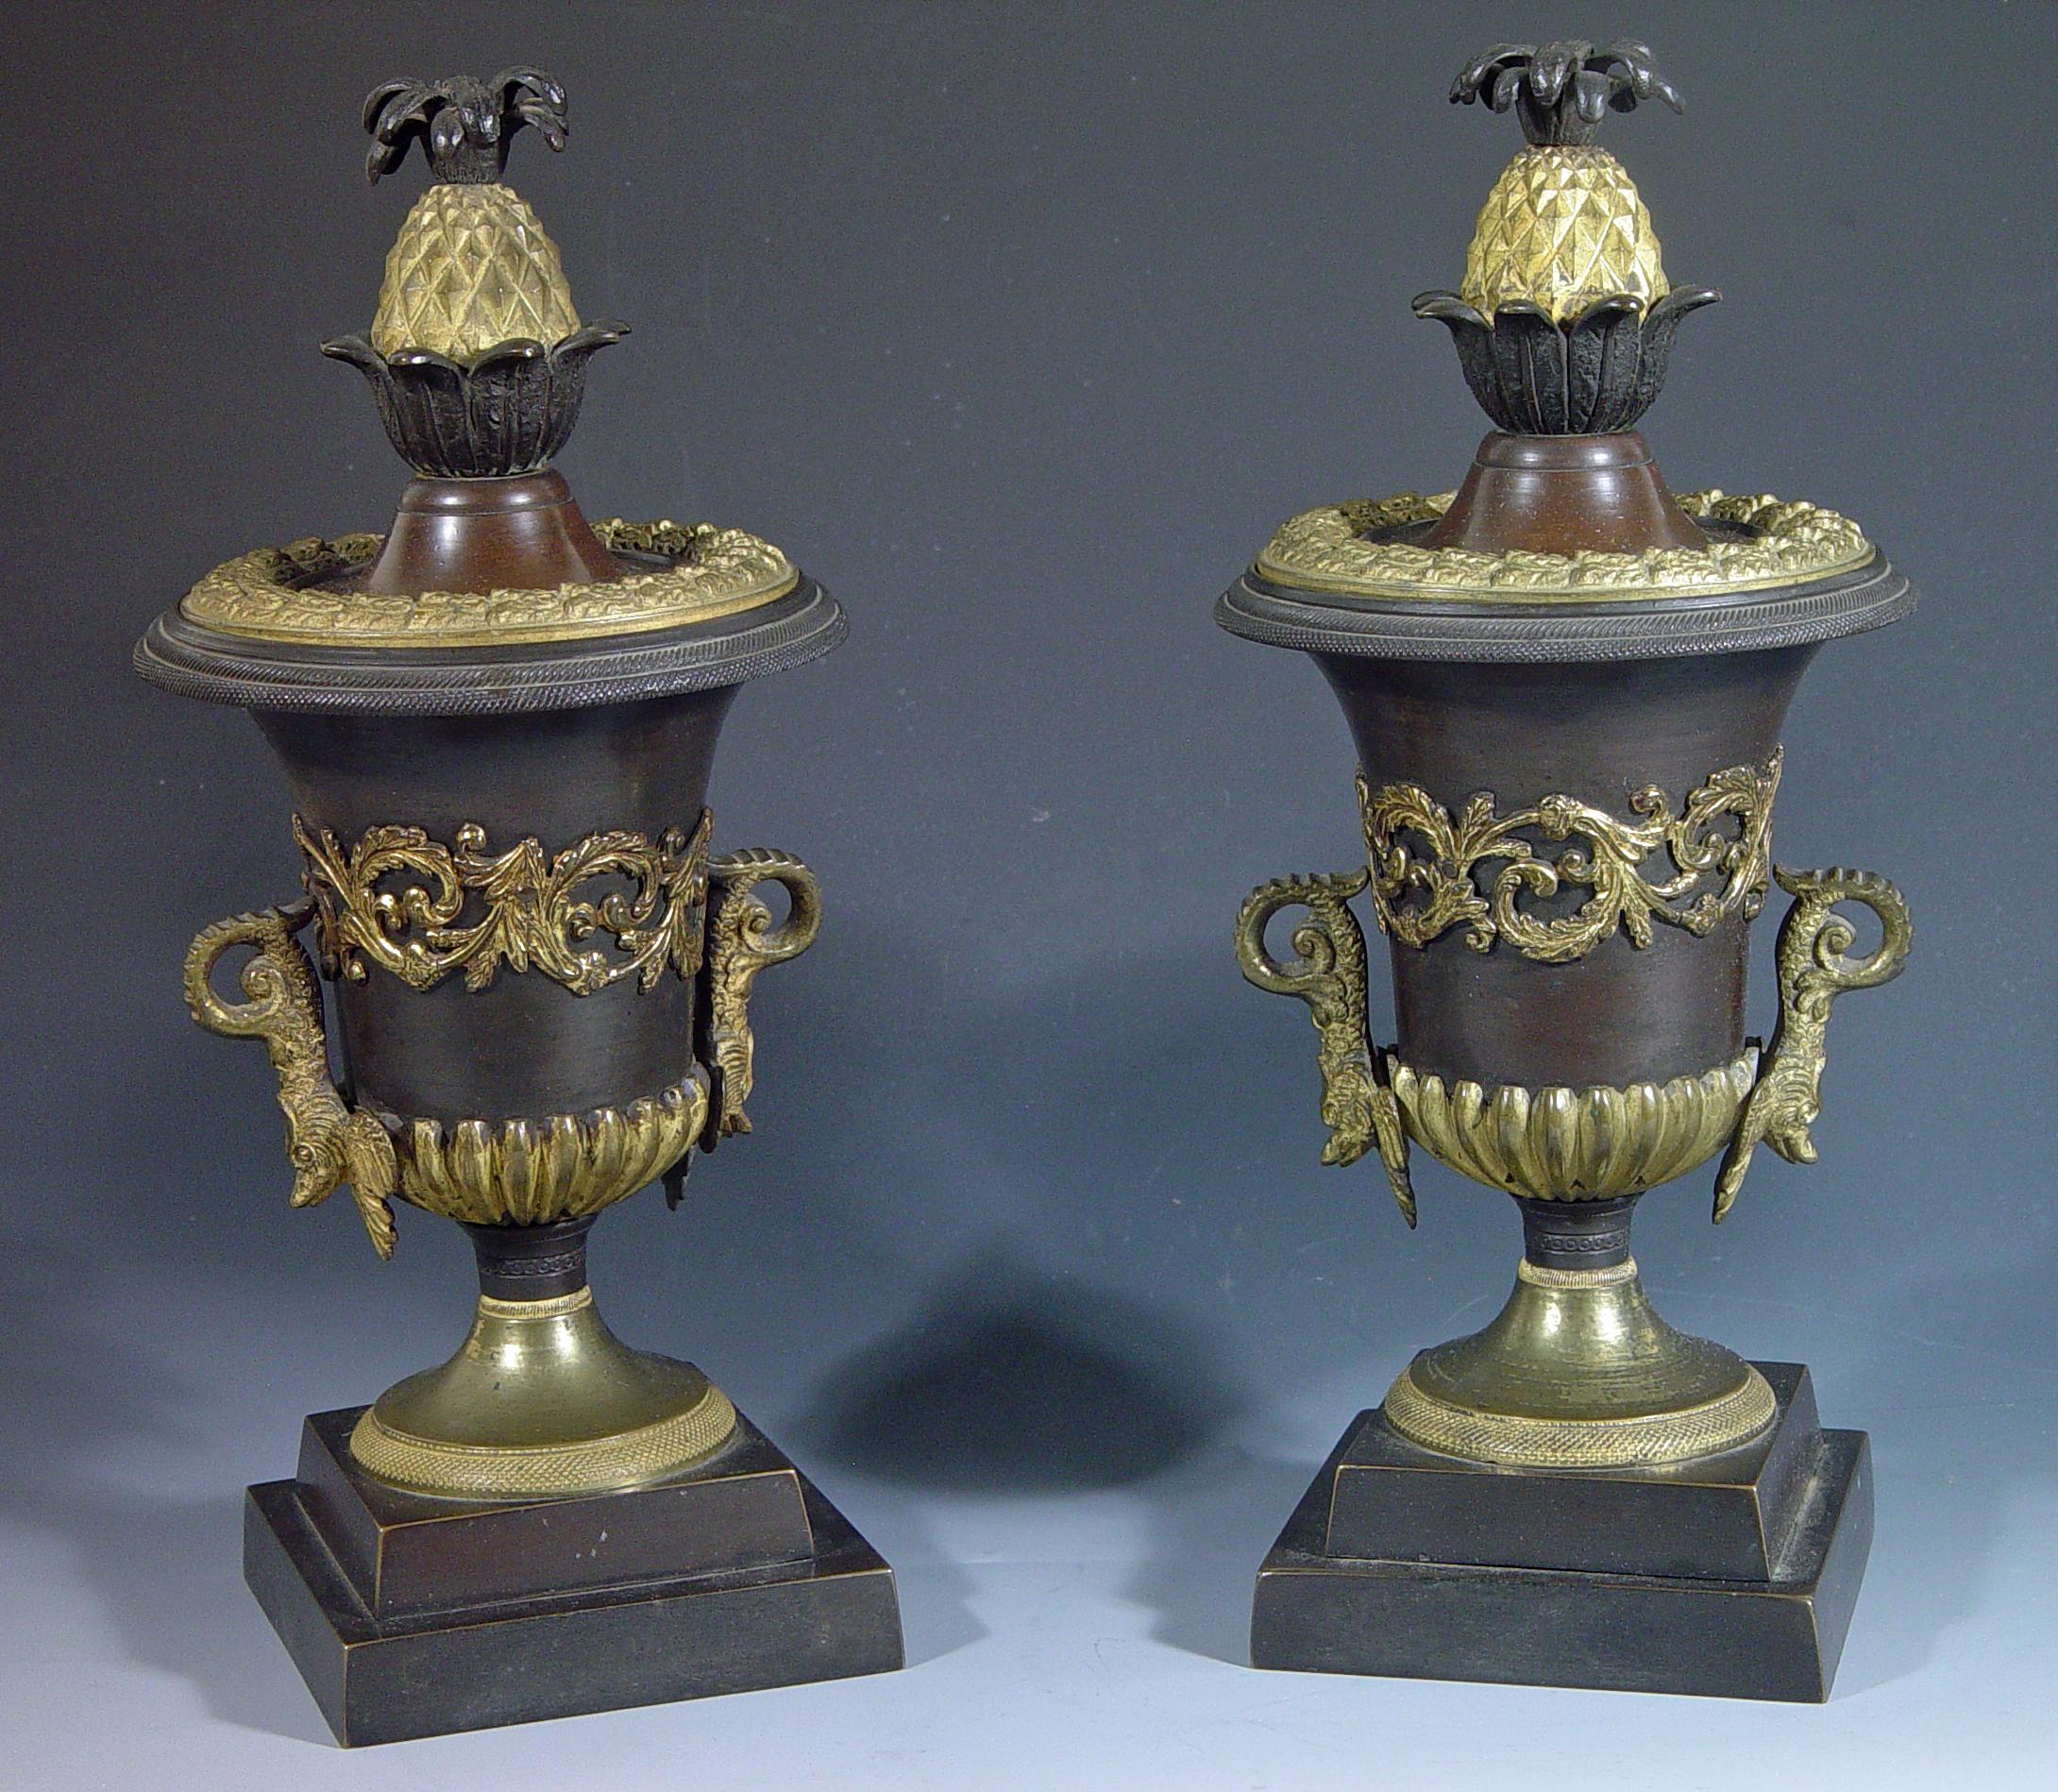 Regency Bronze and Ormolu Candlestick Urns with Pineapple Reversible Tops In Good Condition For Sale In Downingtown, PA